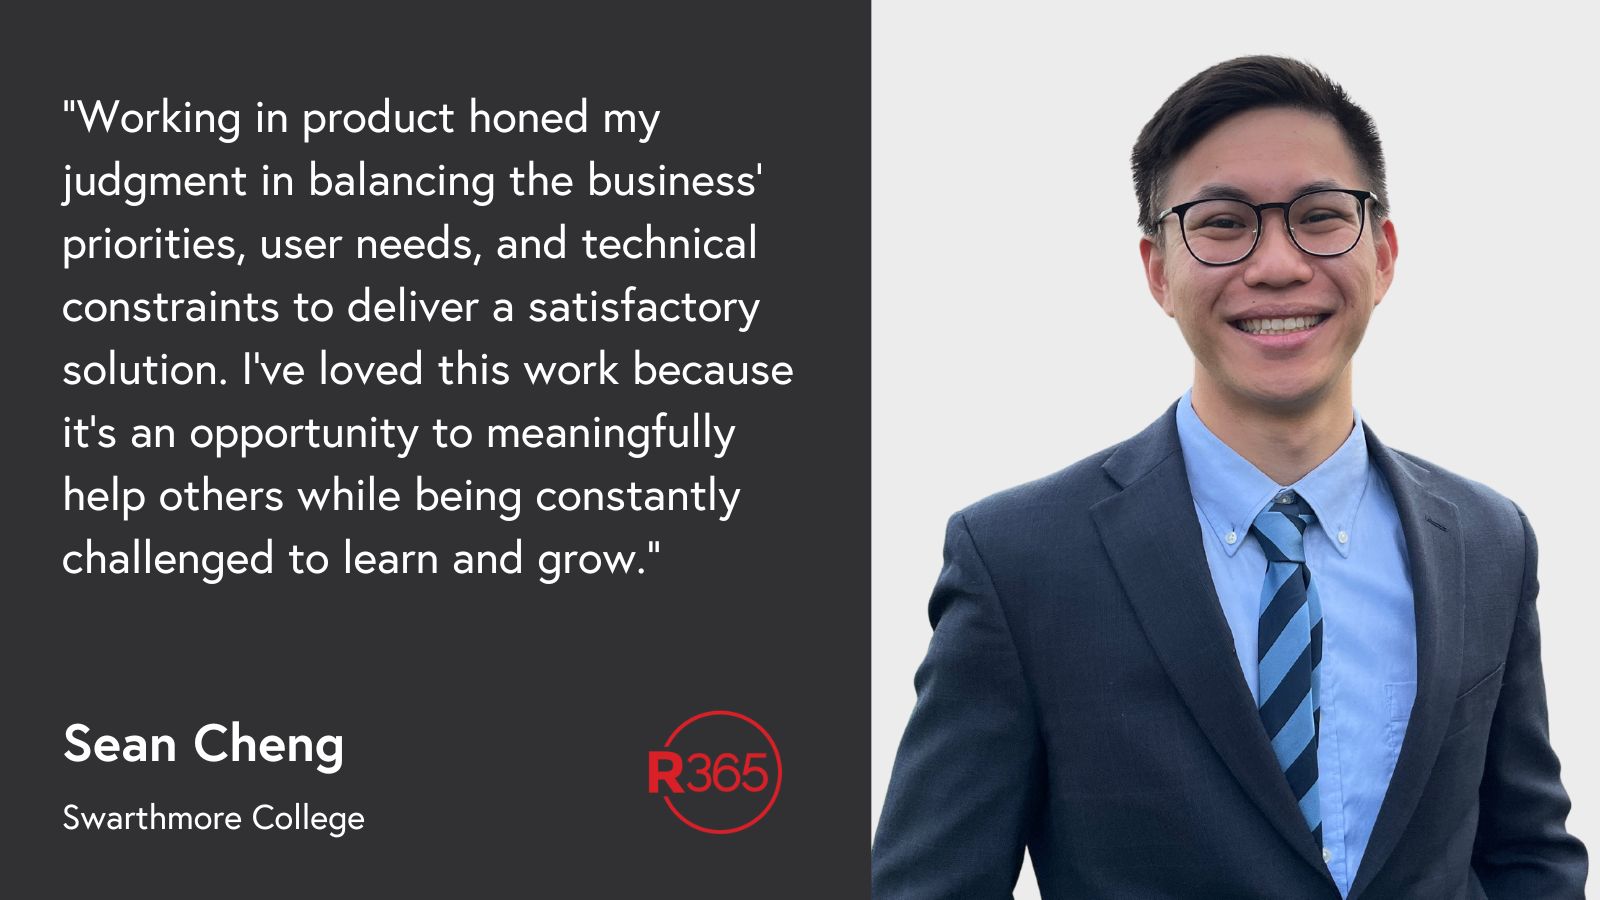 Sean Cheng - Product Manager Intern at Restaurant365